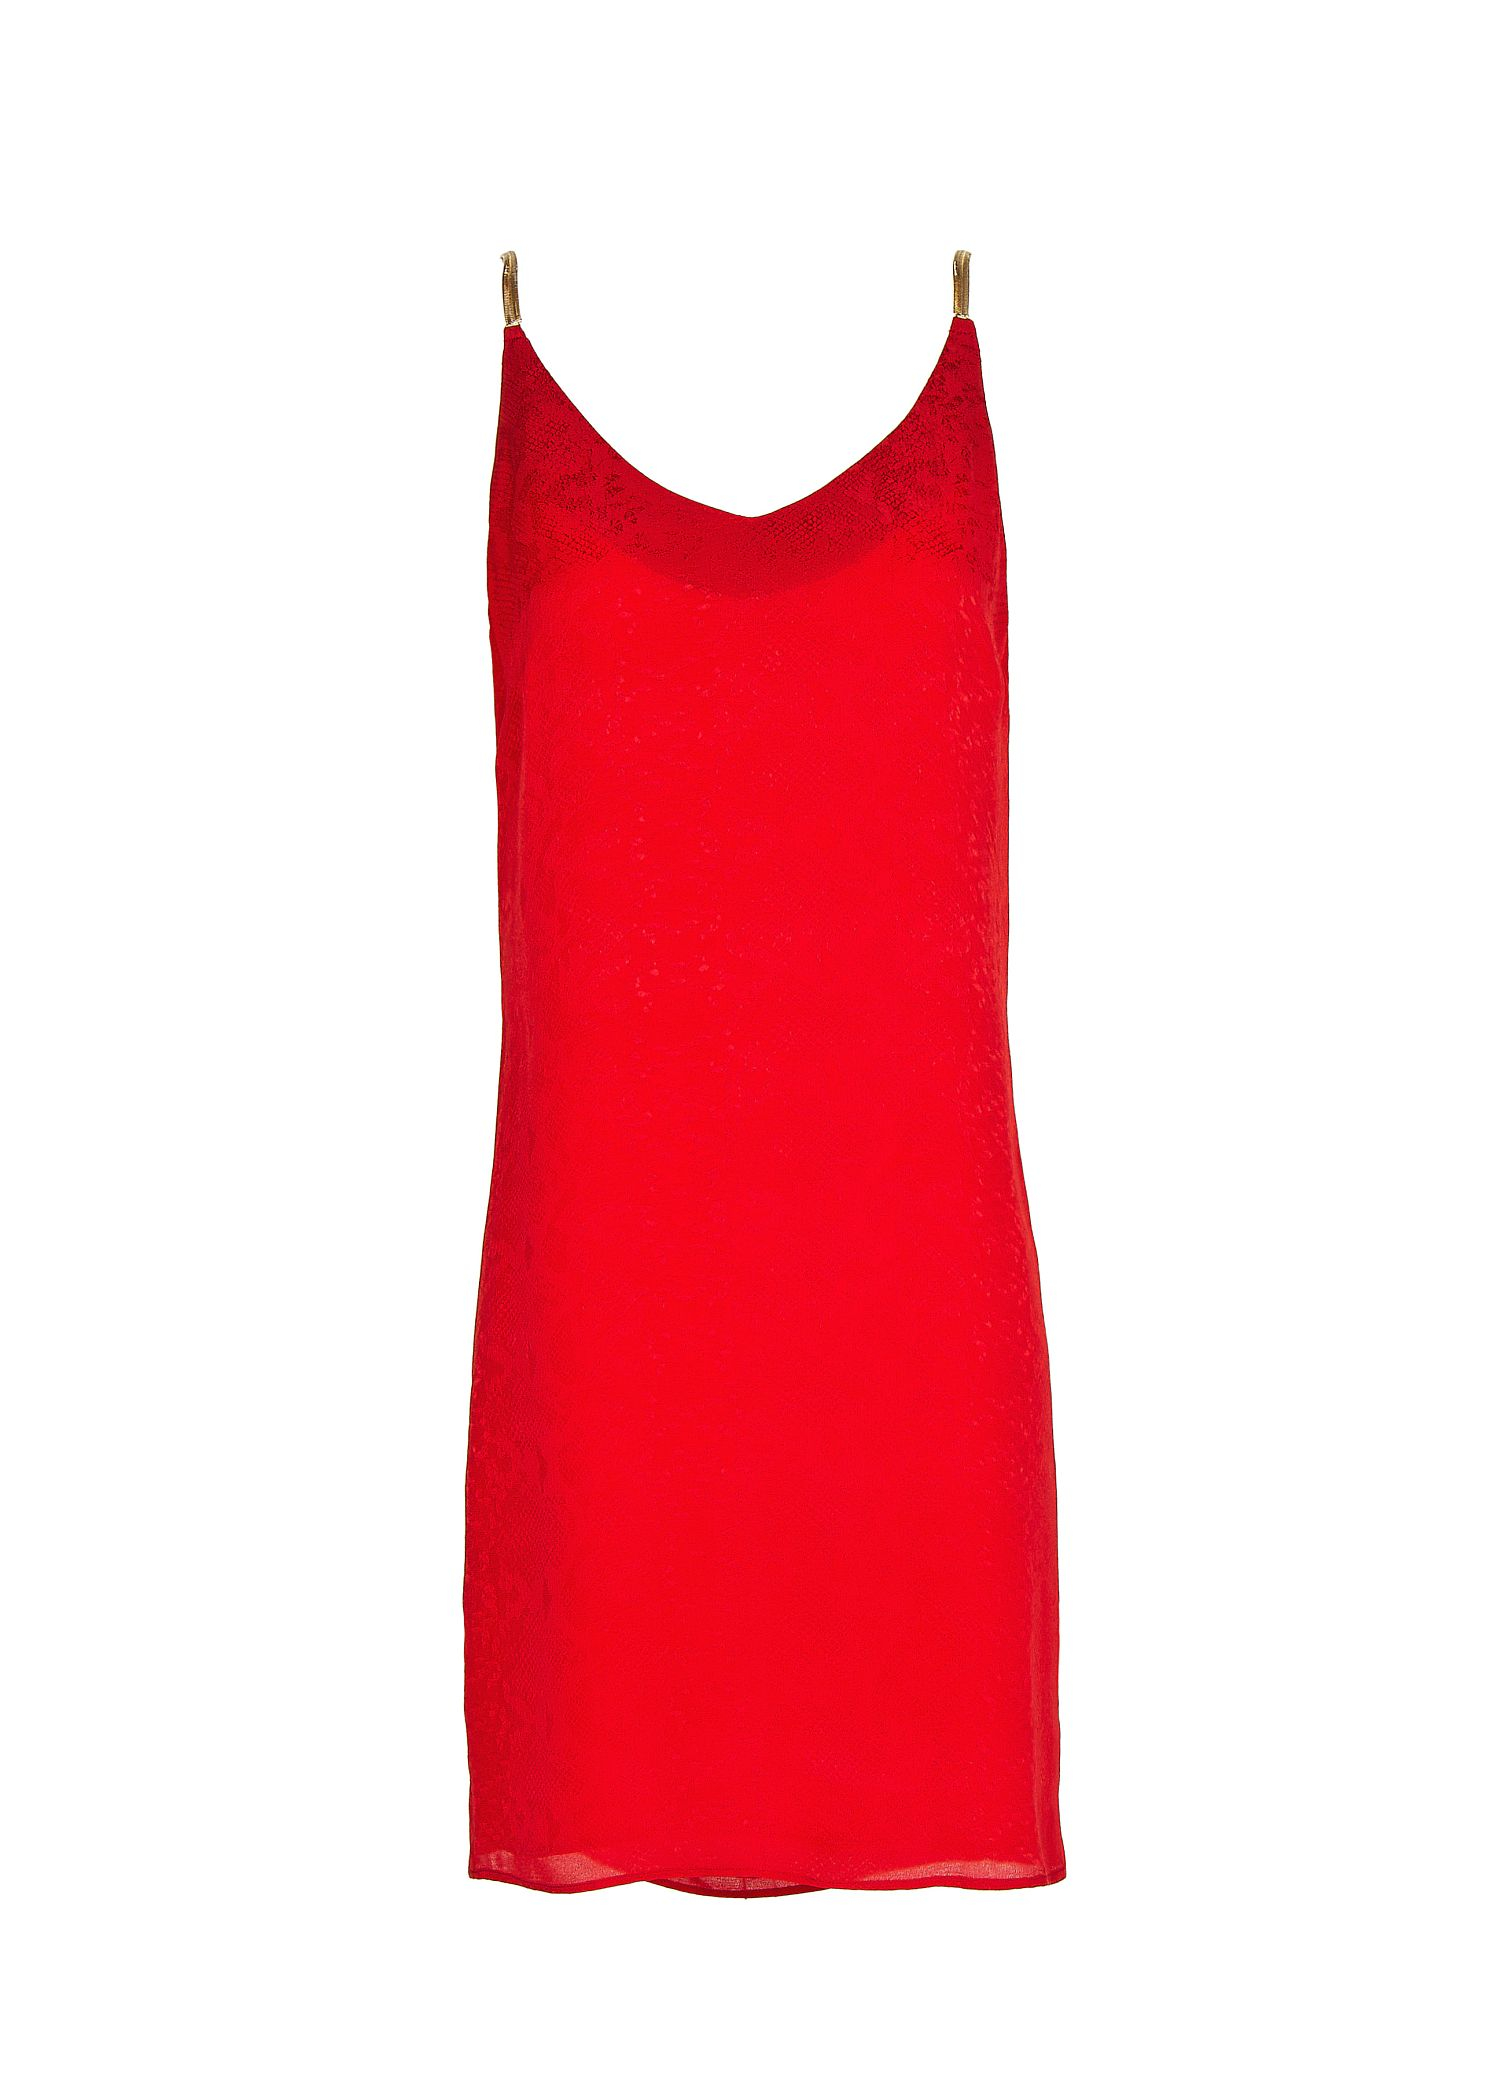 Lyst - Mango Wrapped Back Strappy Dress in Red